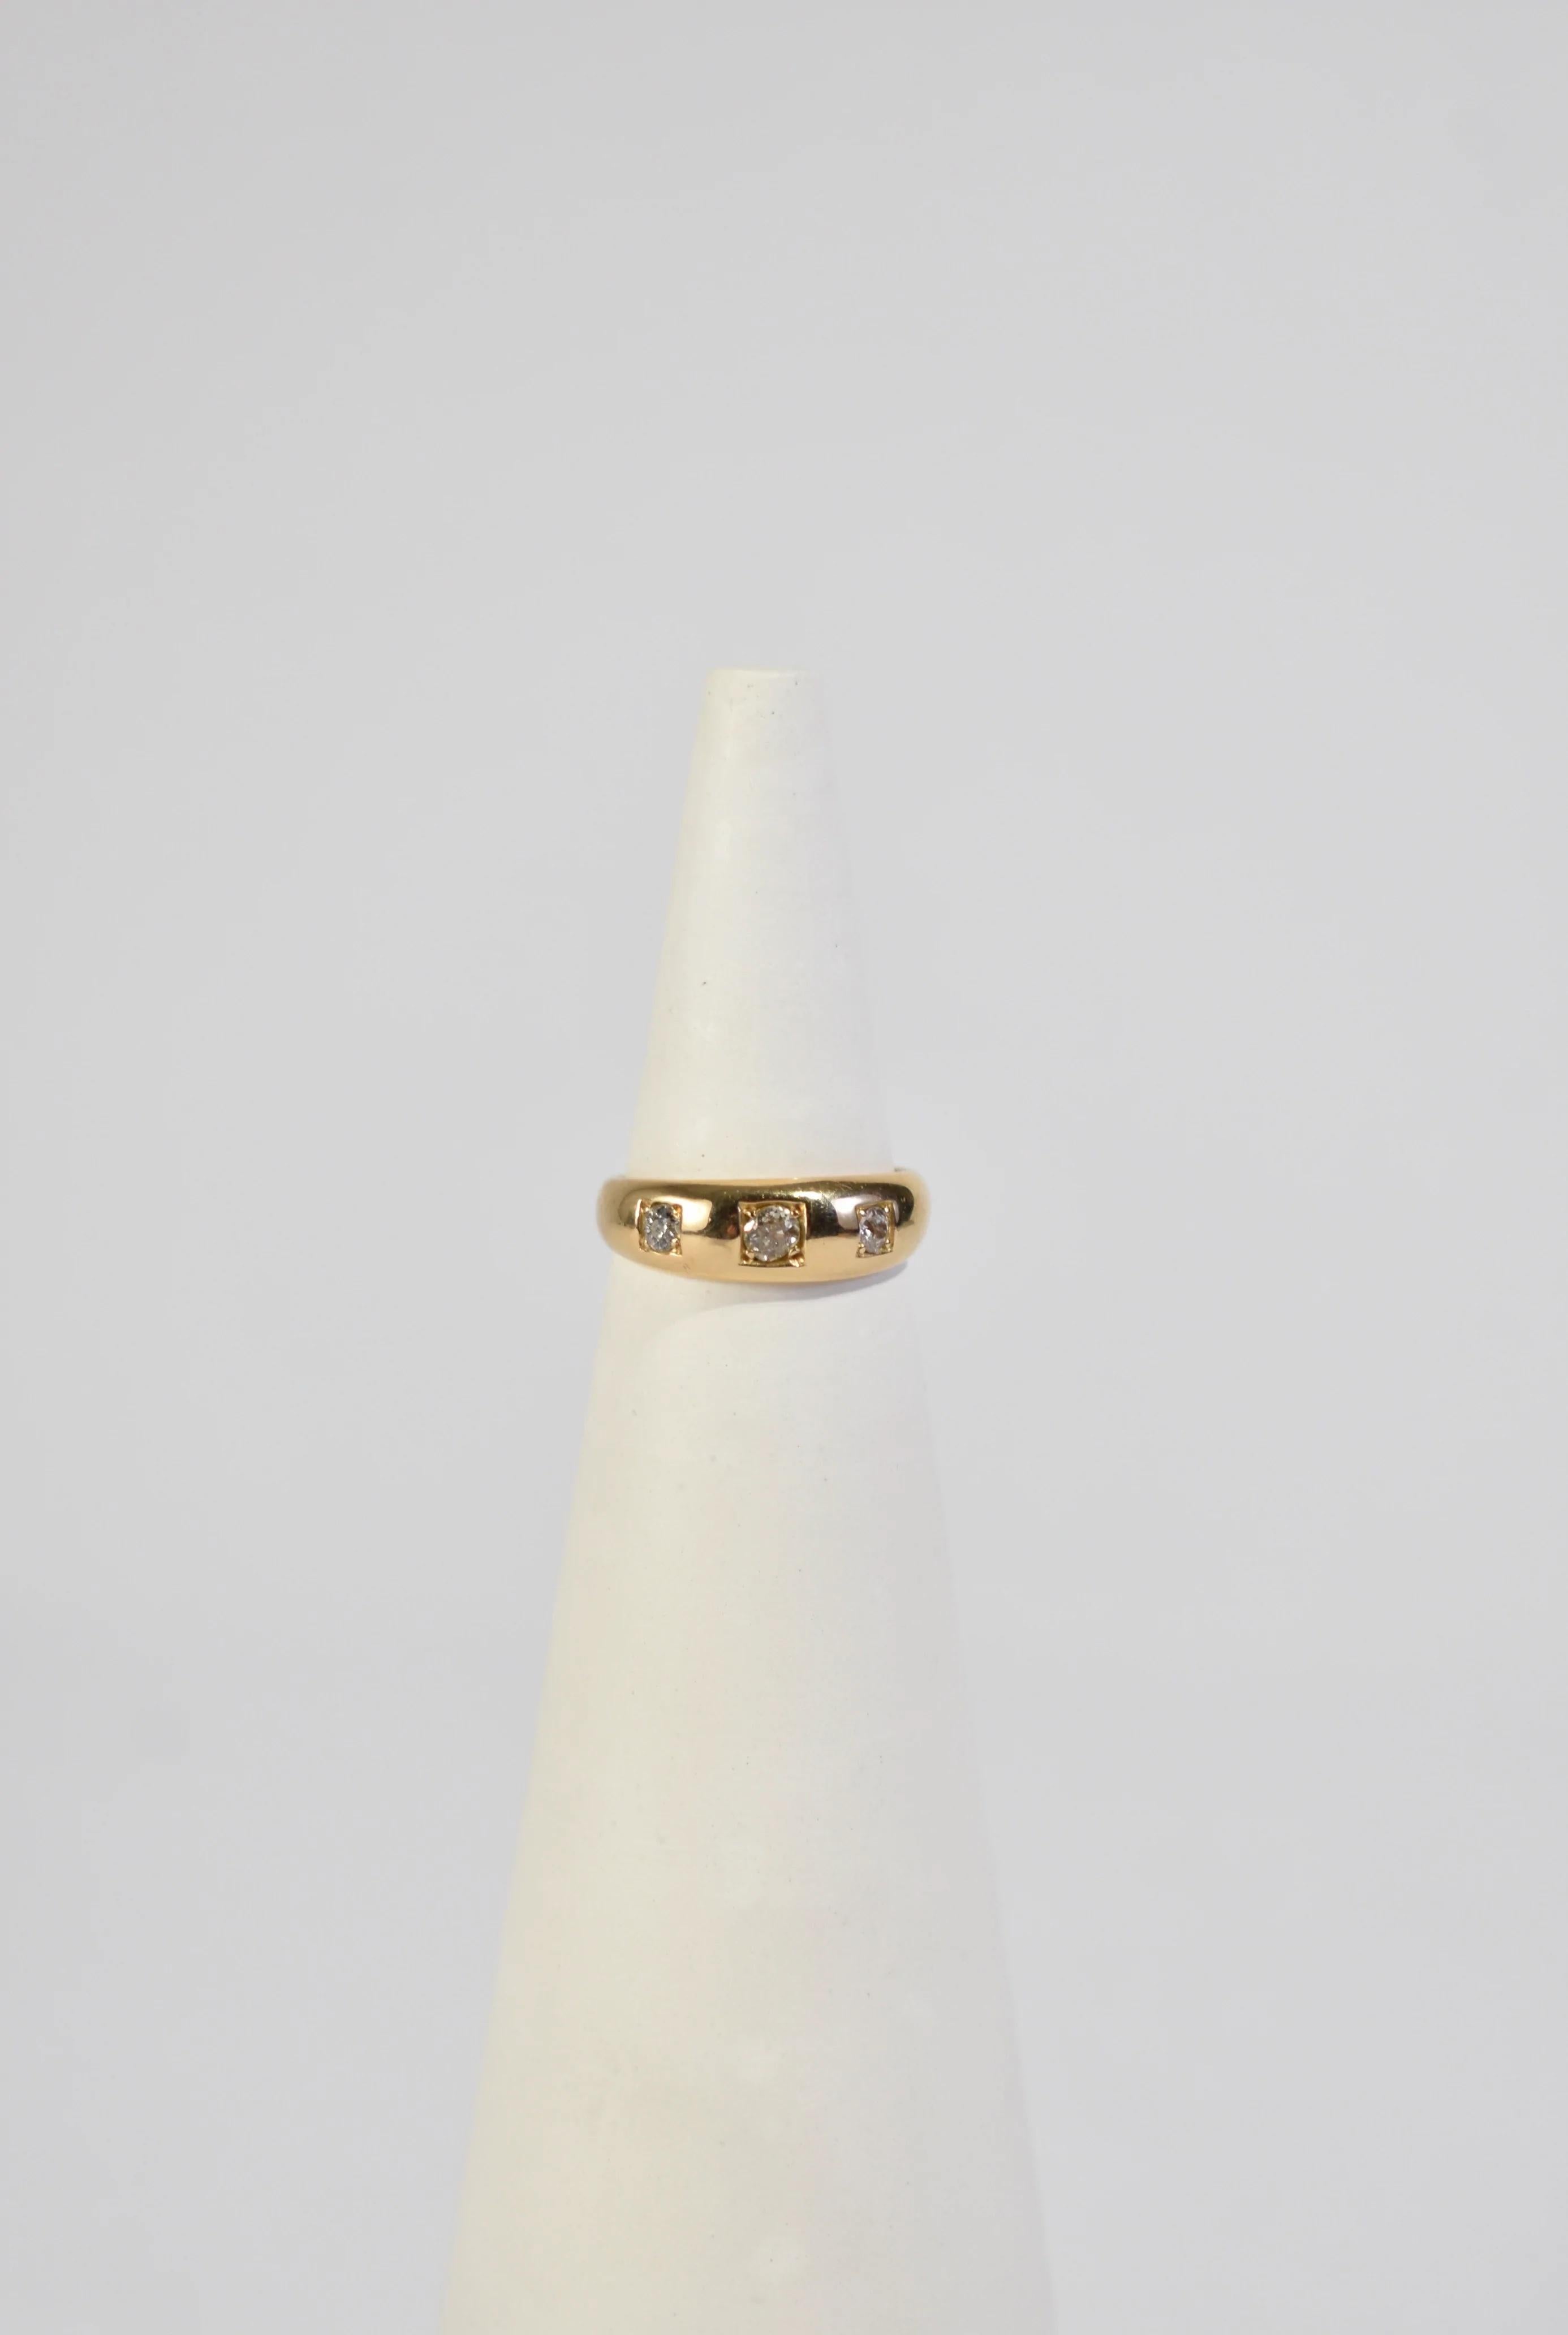 Stunning, Victorian Era 18k gold ring with three old cut diamonds in square shaped settings. 

Material: 18k gold, diamond.